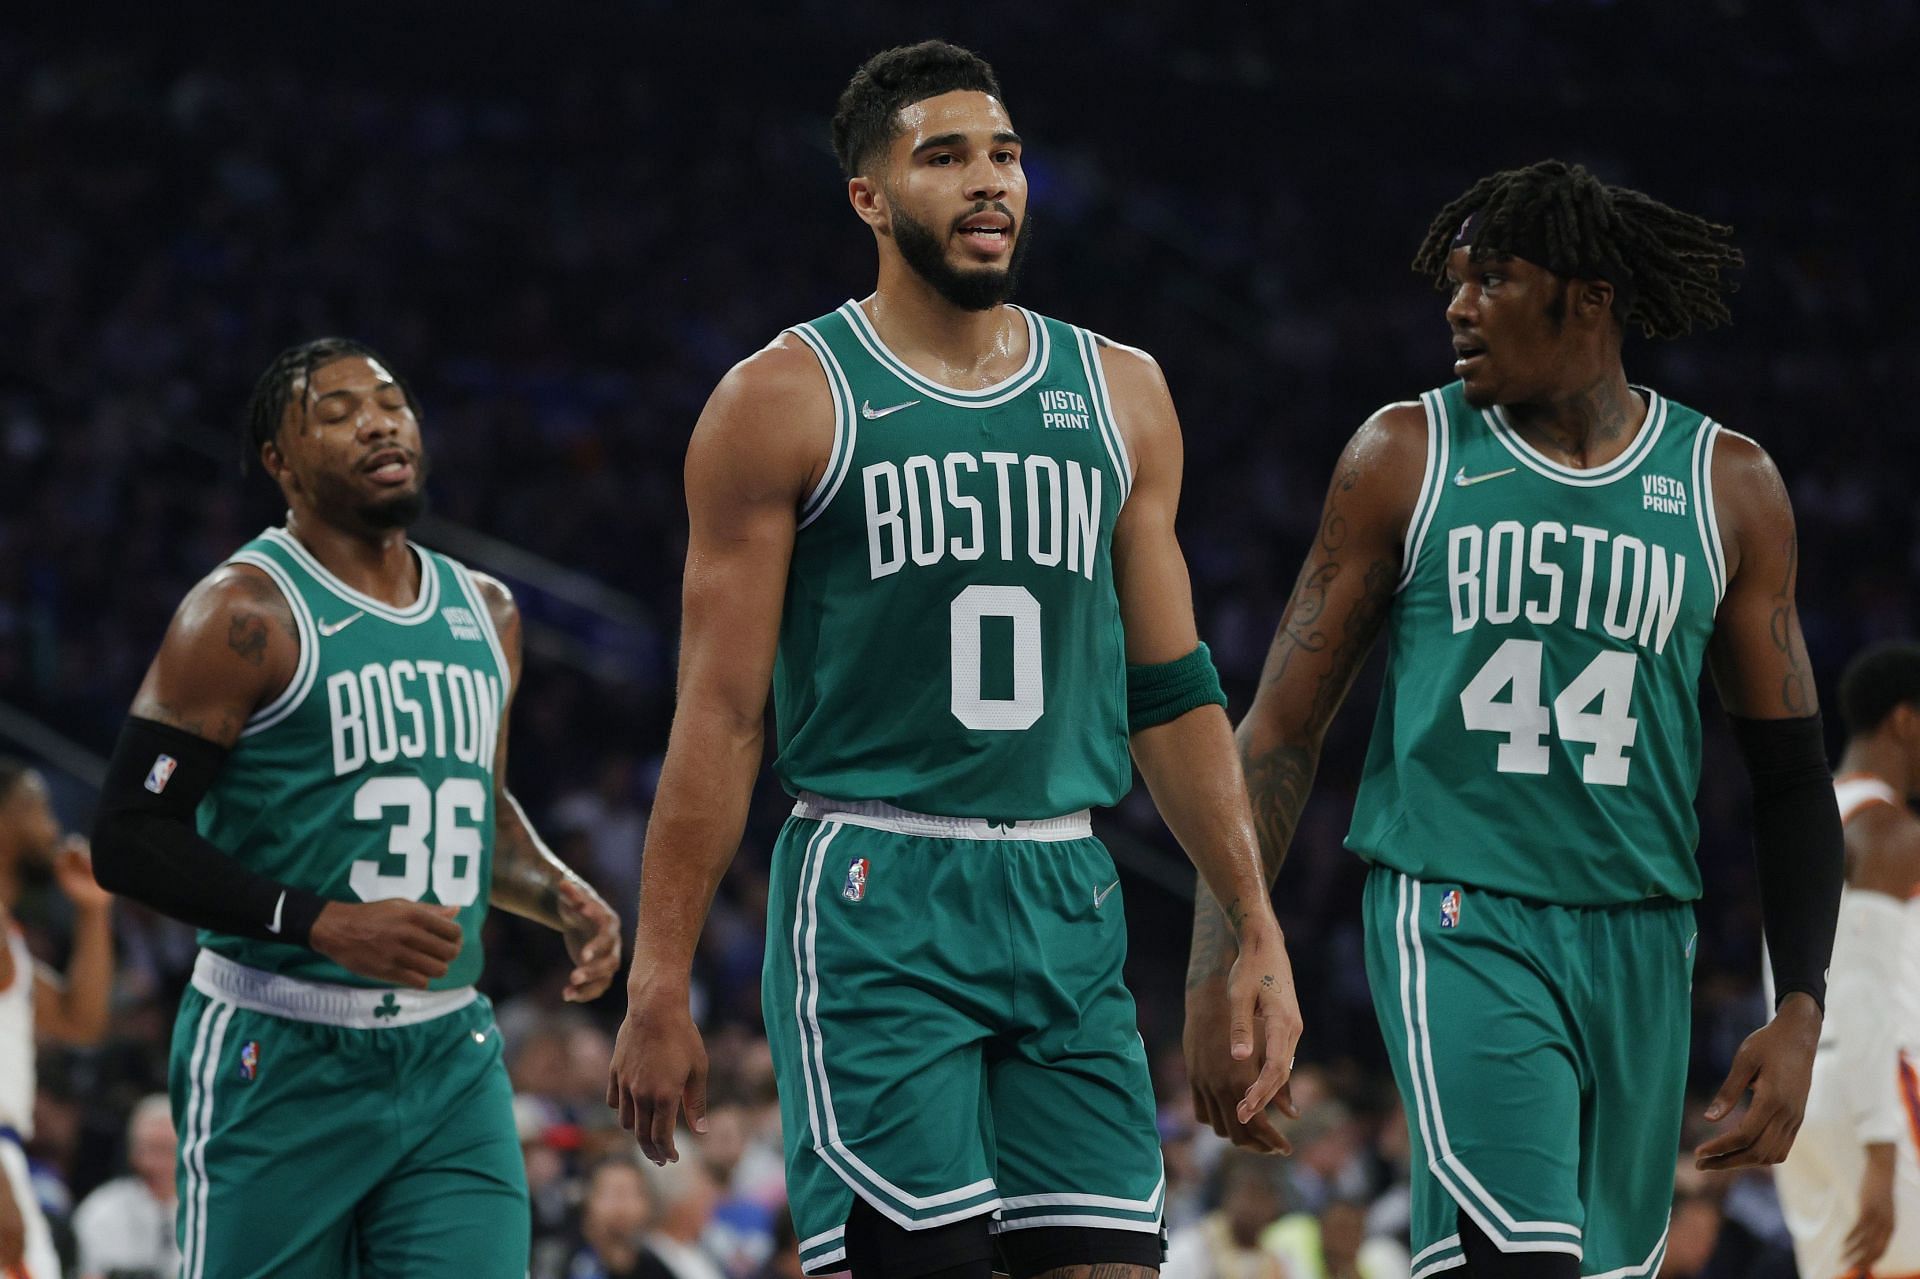 The Celtics suffered a heart-wrenching loss in their season opener